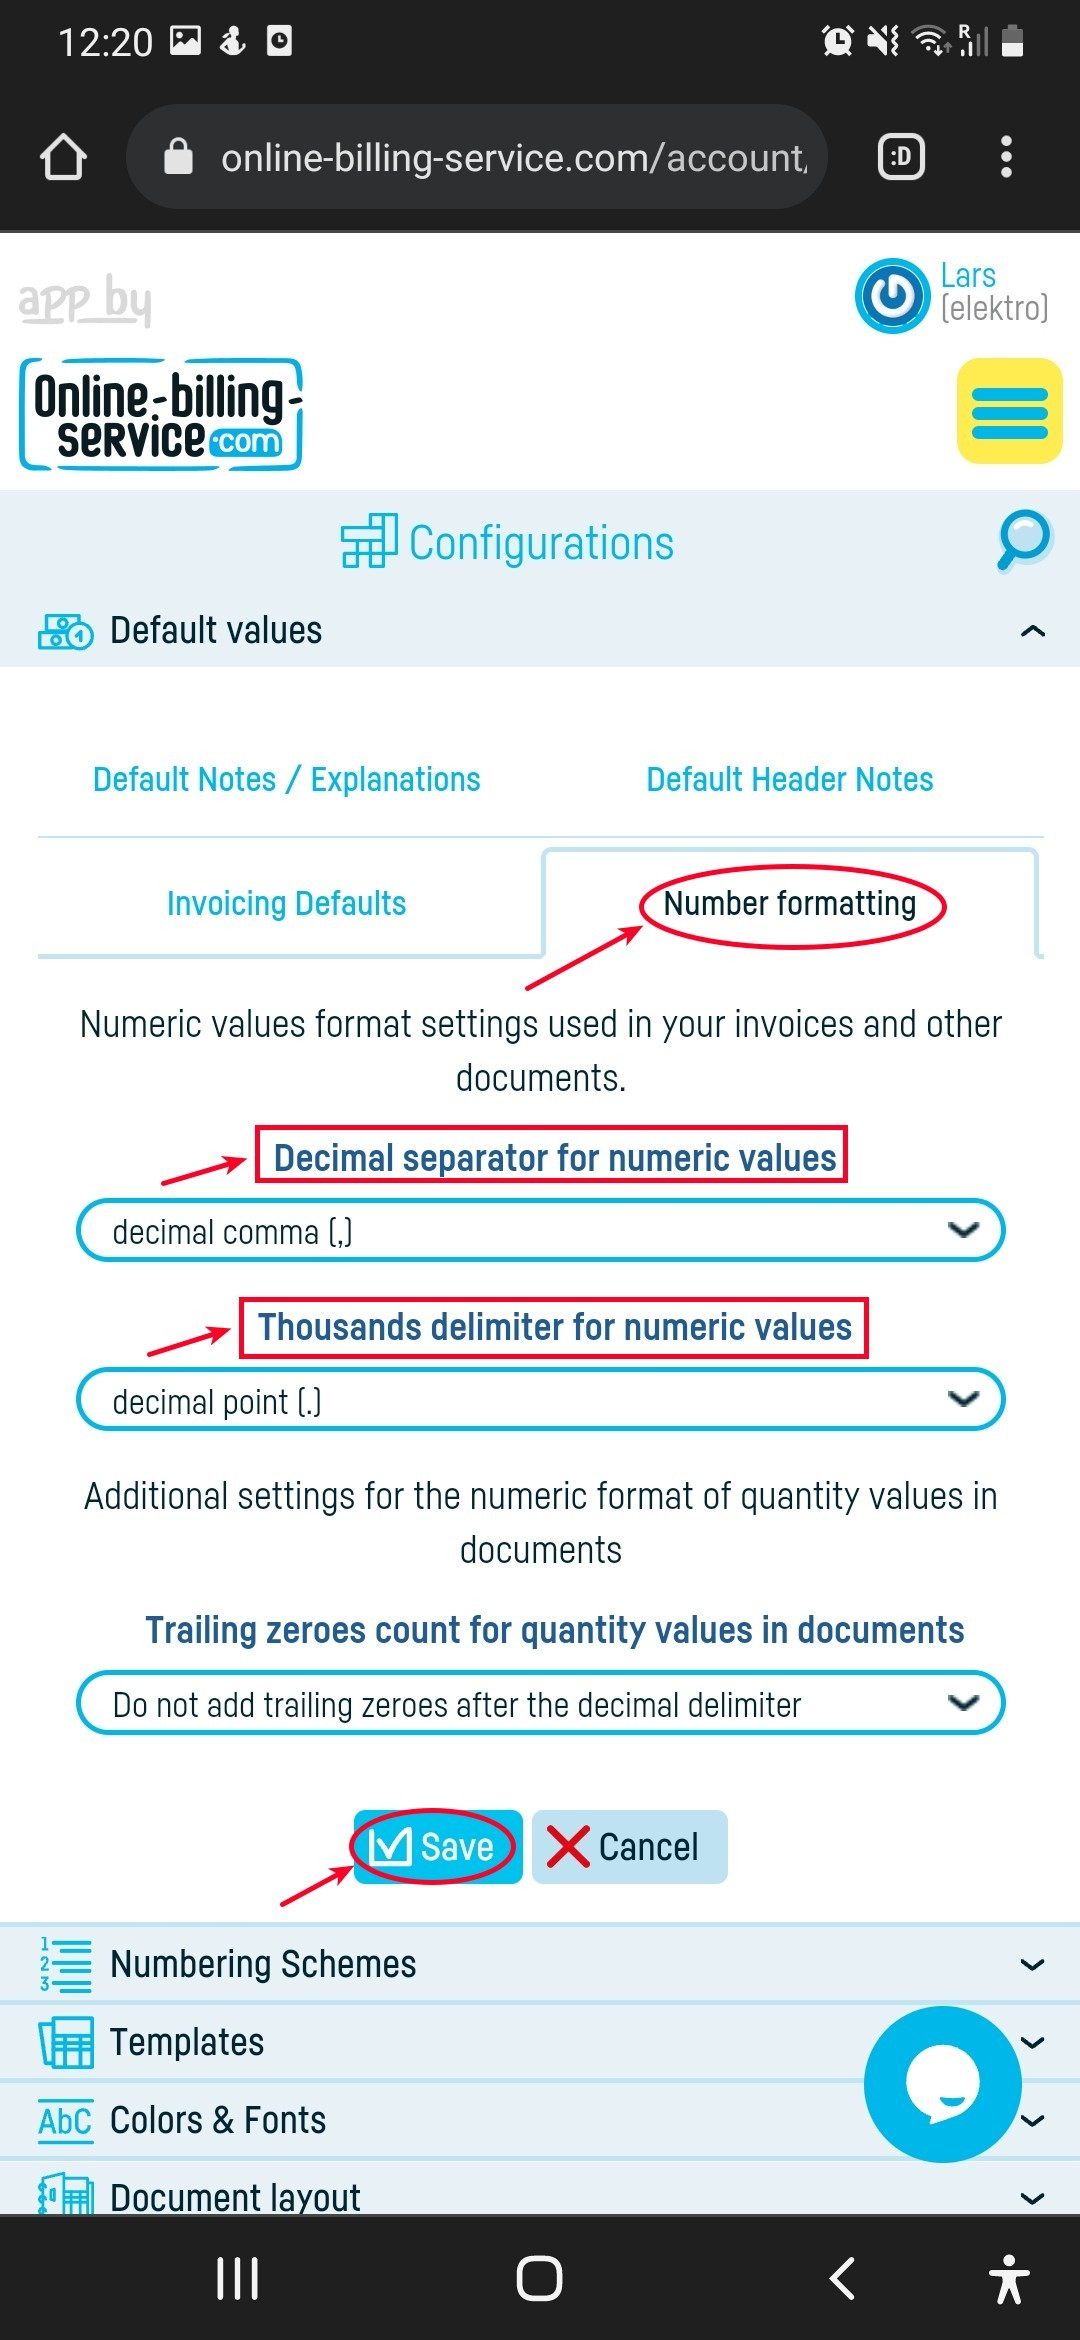 Formatting currency values in invoices - step 3